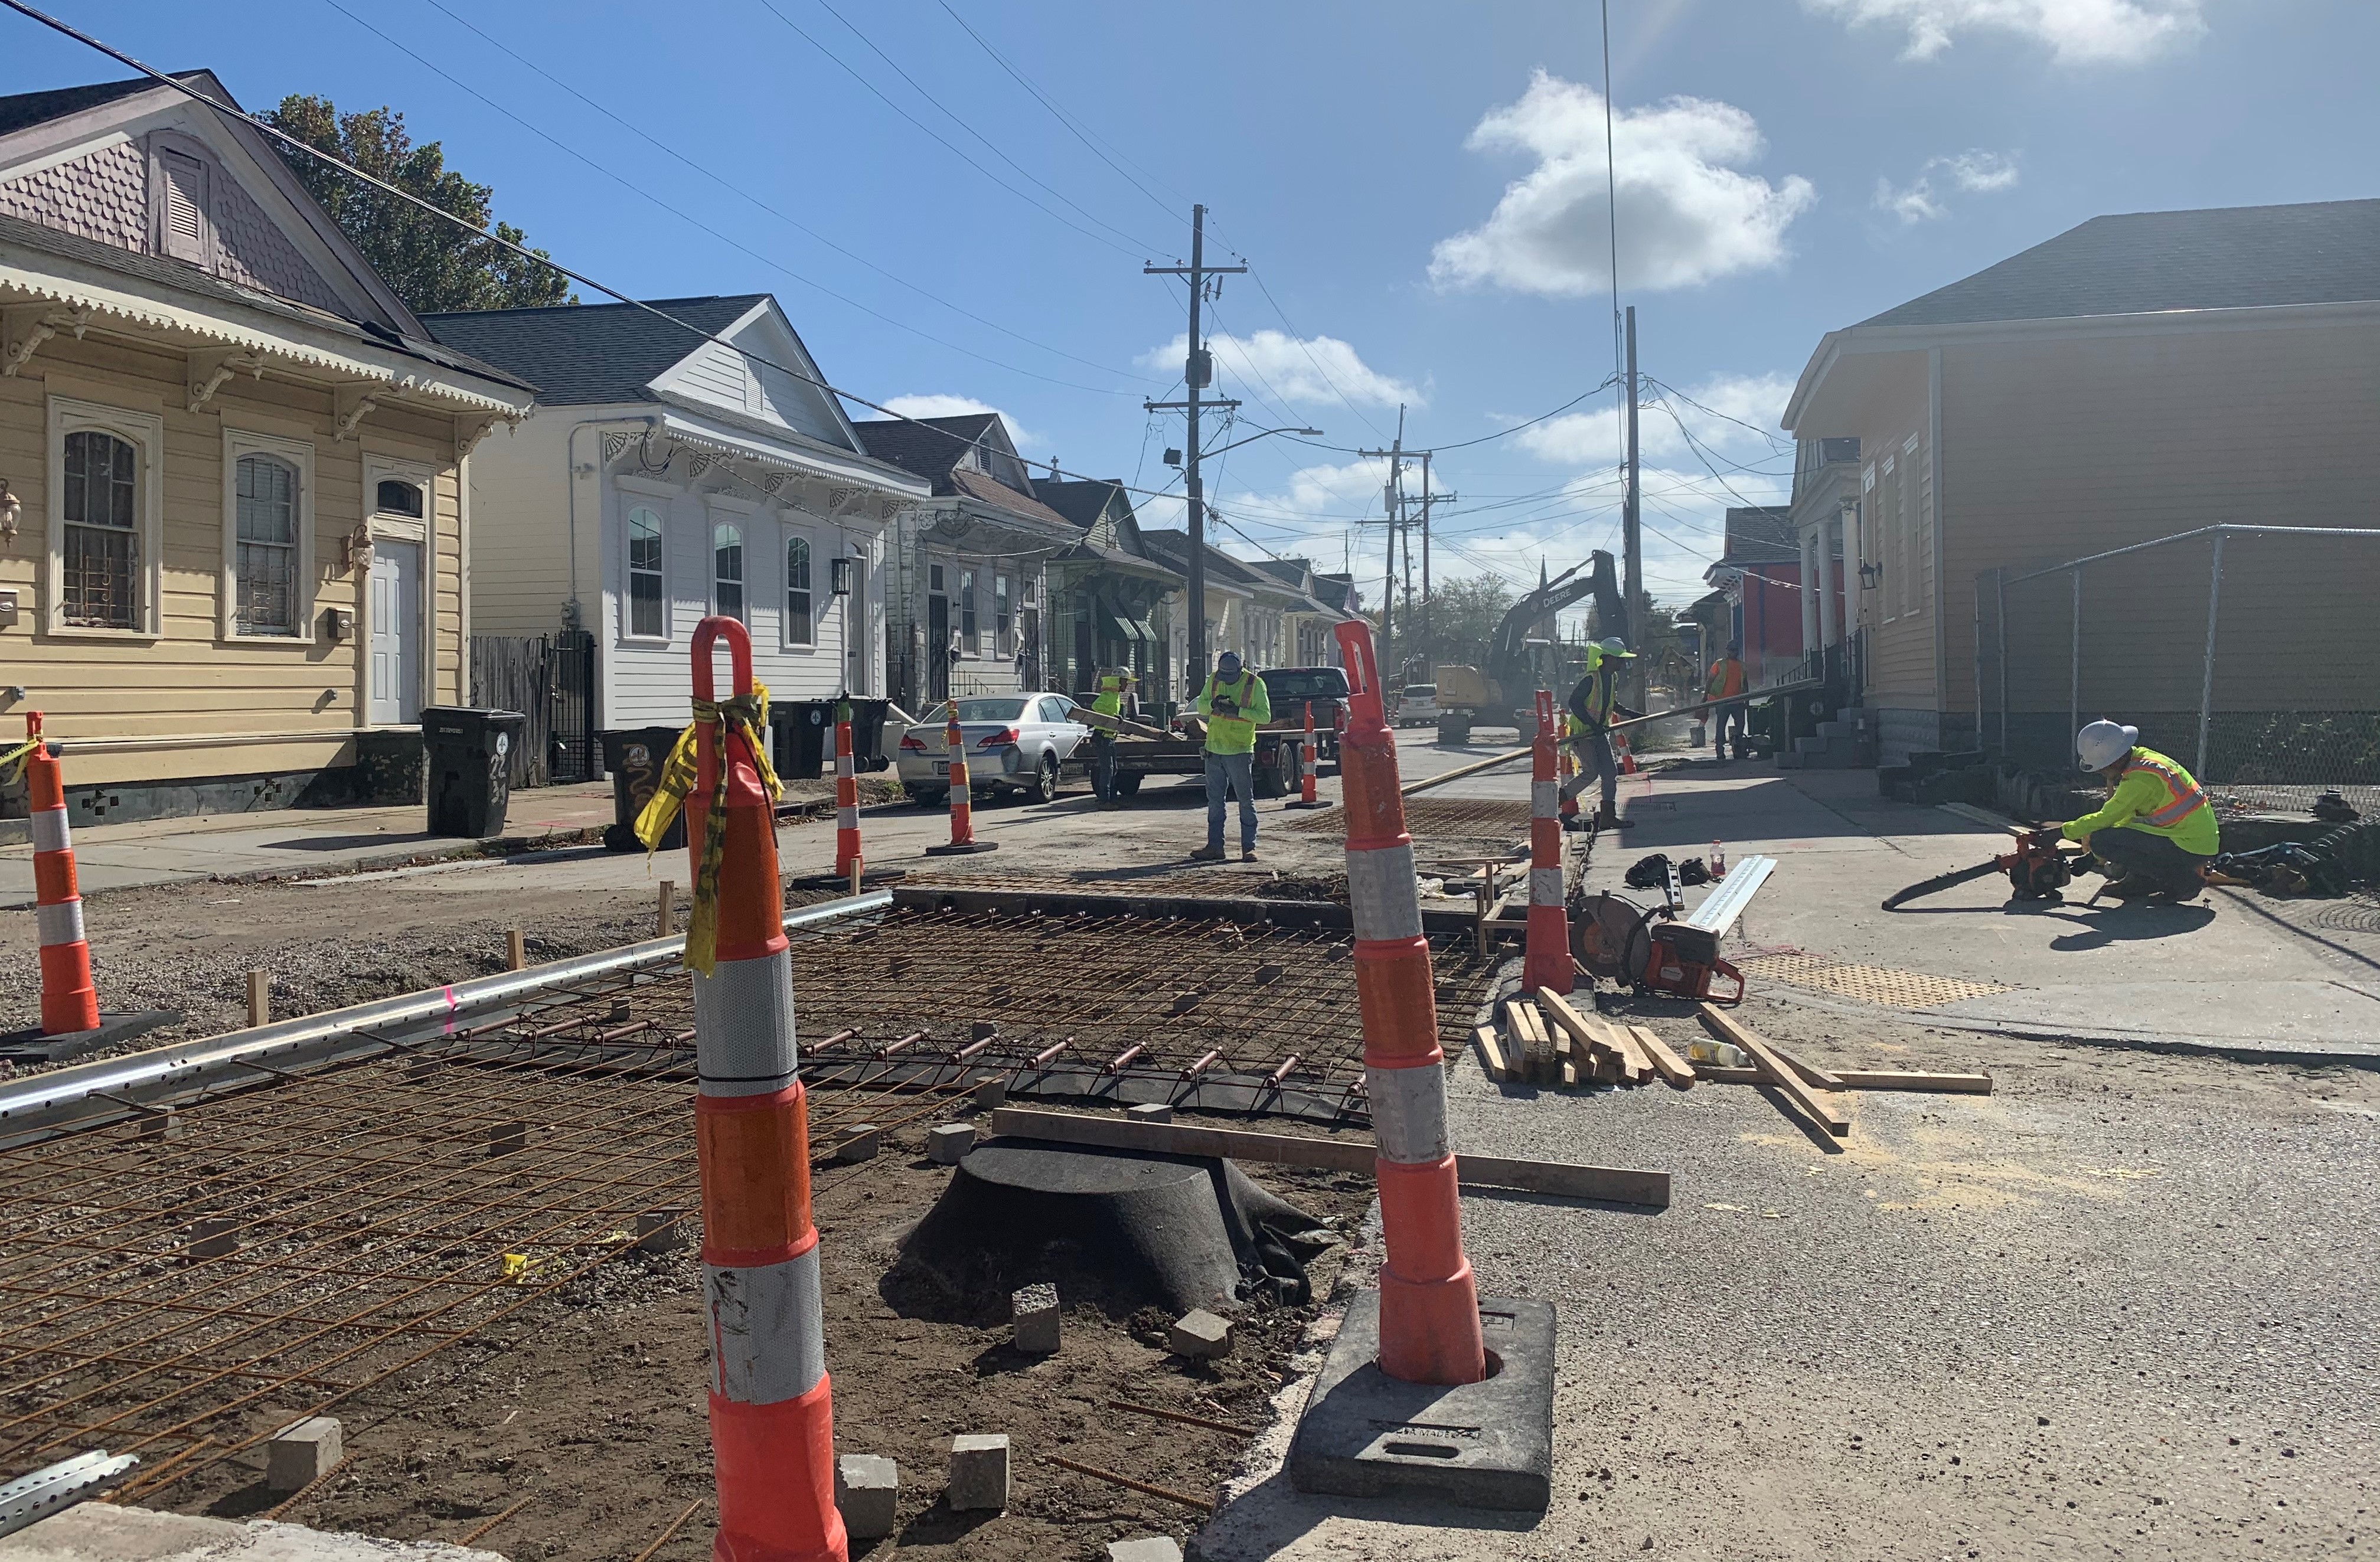 PROGRESS CONTINUES IN THE TREME-LAFITTE GROUP A PROJECT